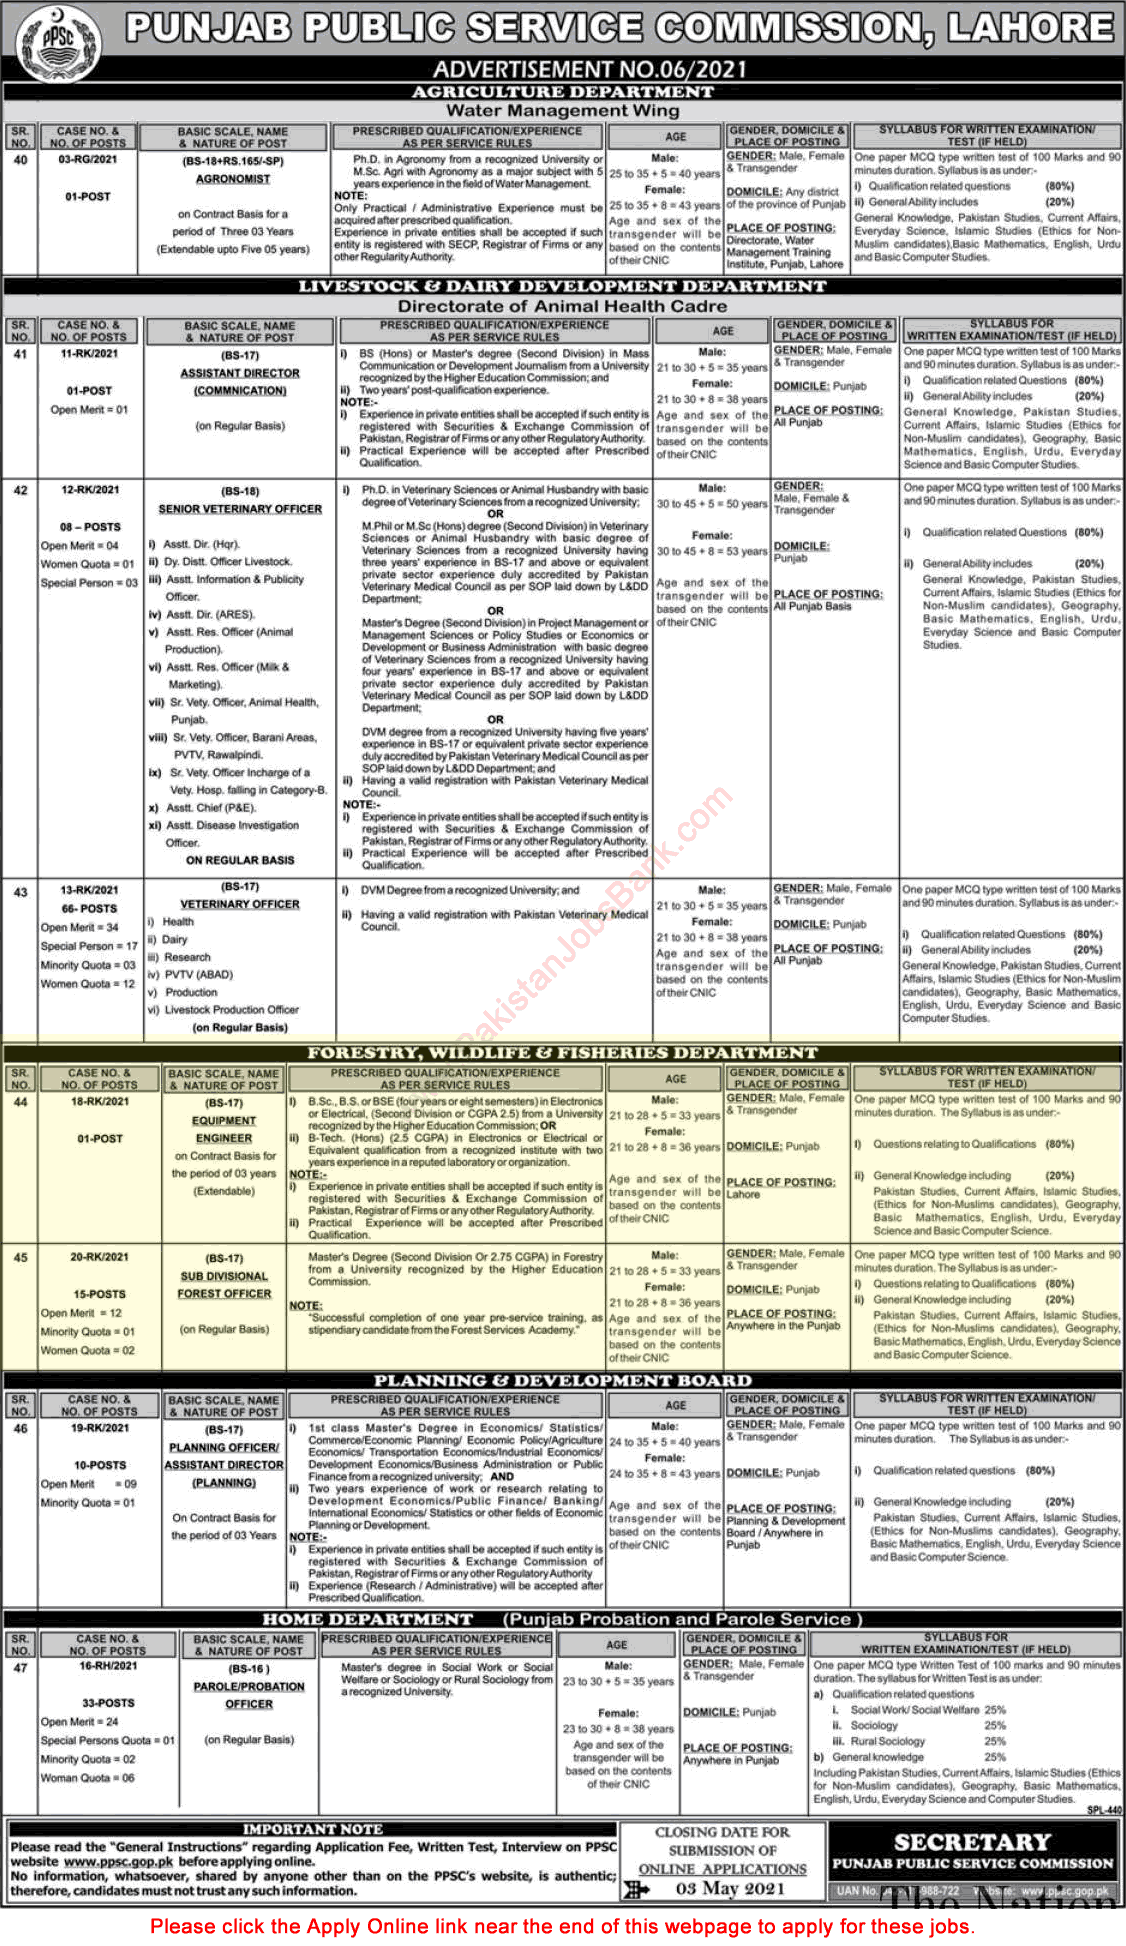 Forestry Wildlife and Fisheries Department Punjab Jobs April 2021 PPSC Apply Online Latest